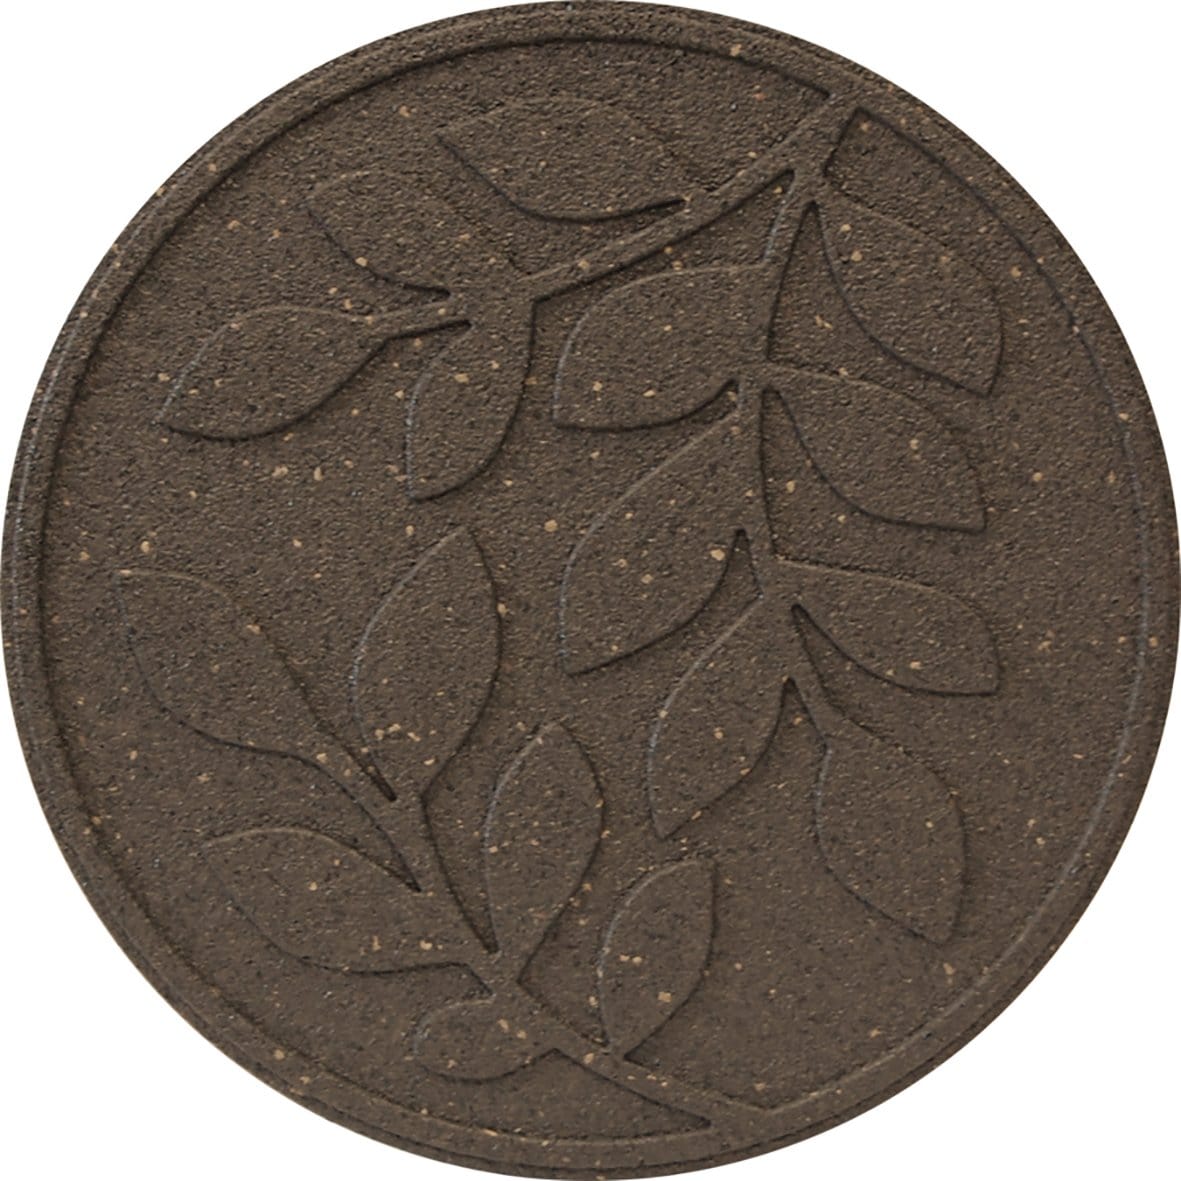 Brown stepping stone with leaf pattern (Pack of 2 save £1) - Safer Surfacing